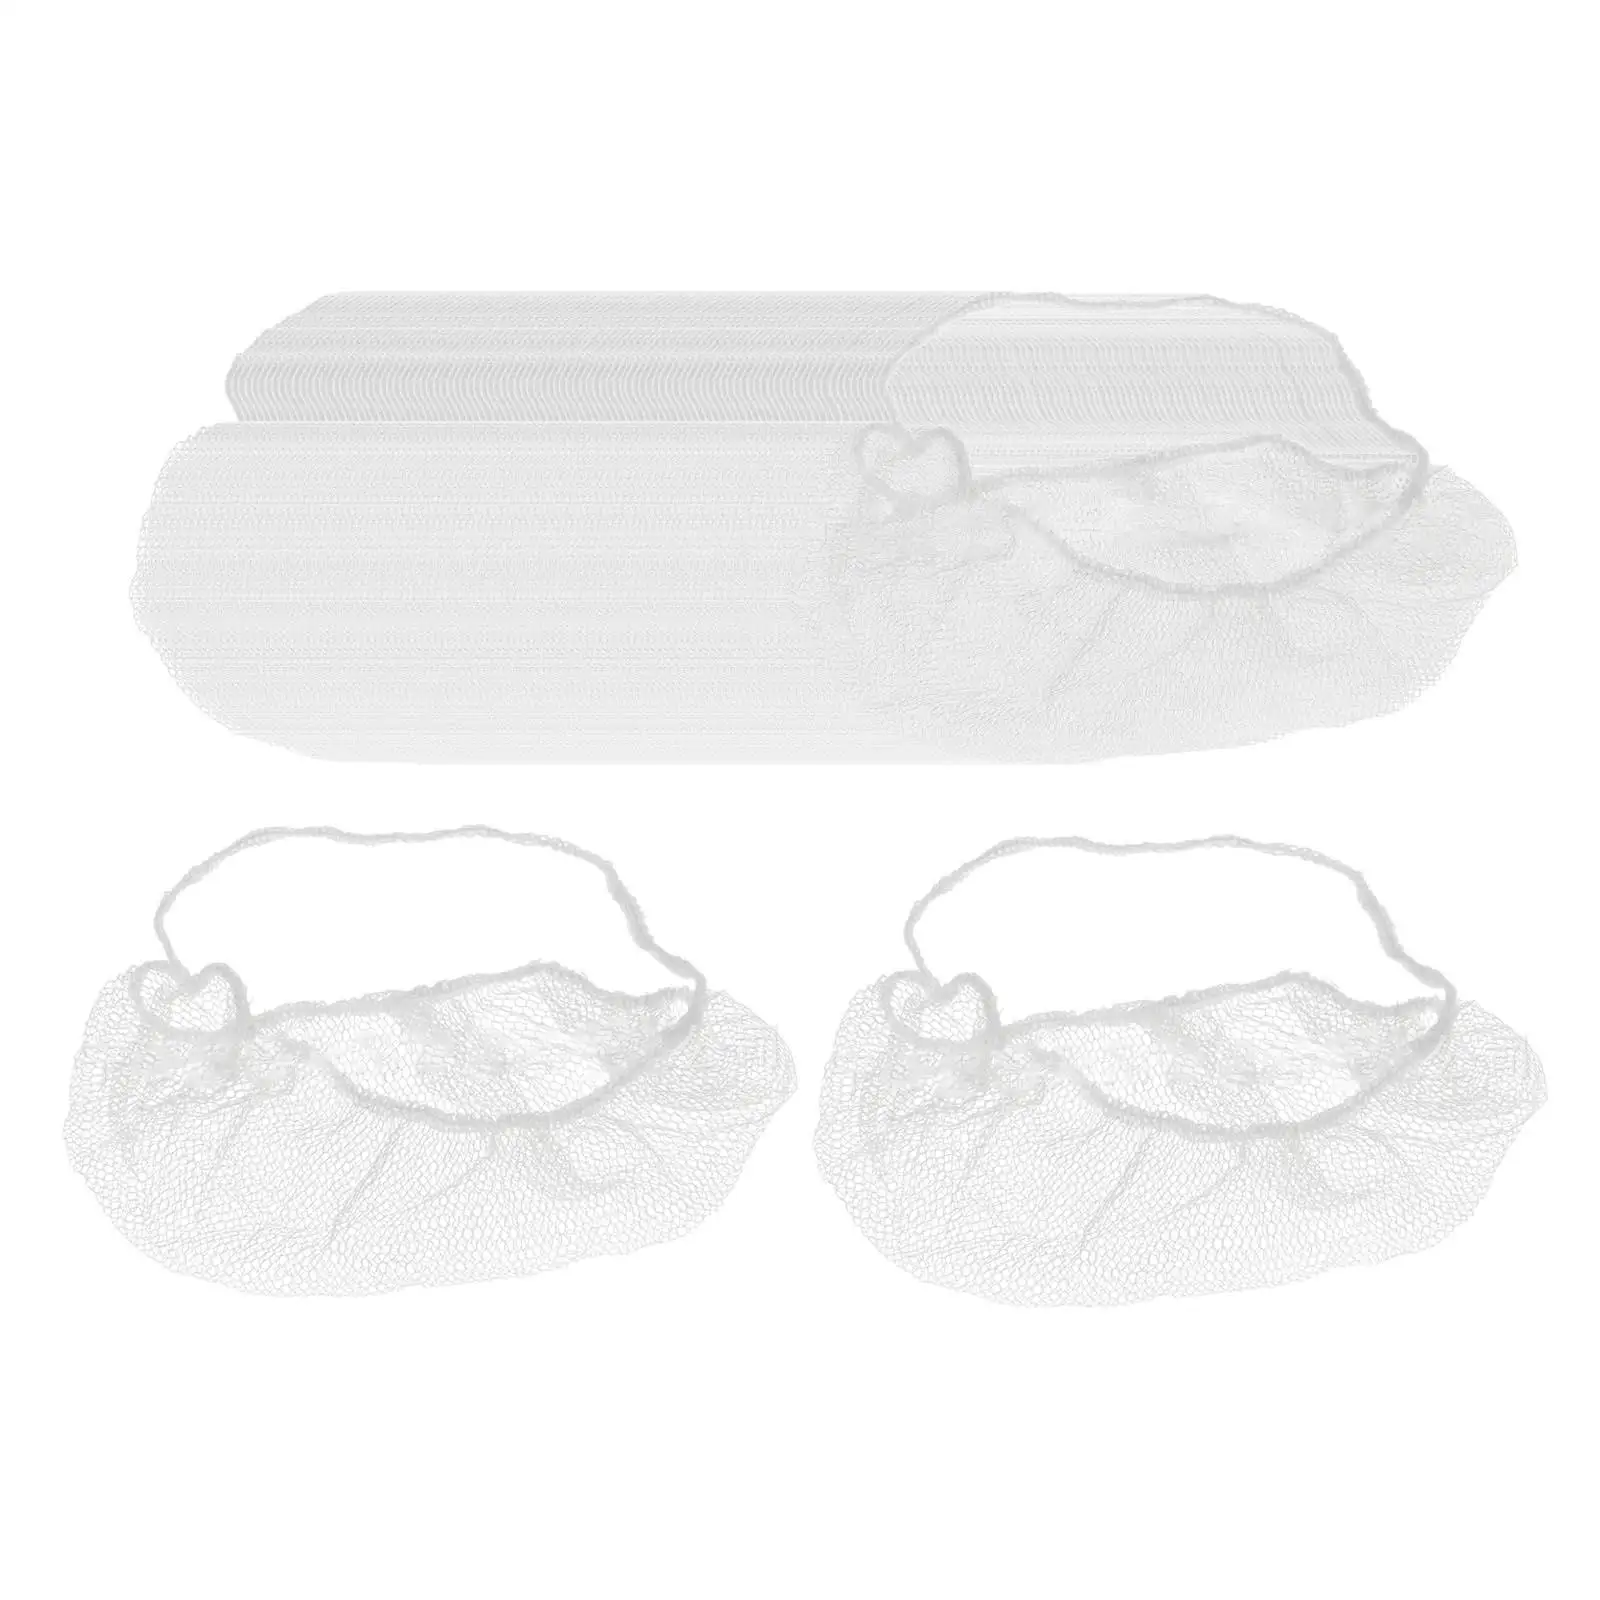 100 Pieces Disposable Nylon Beard Covers Easy to Slip On Durable